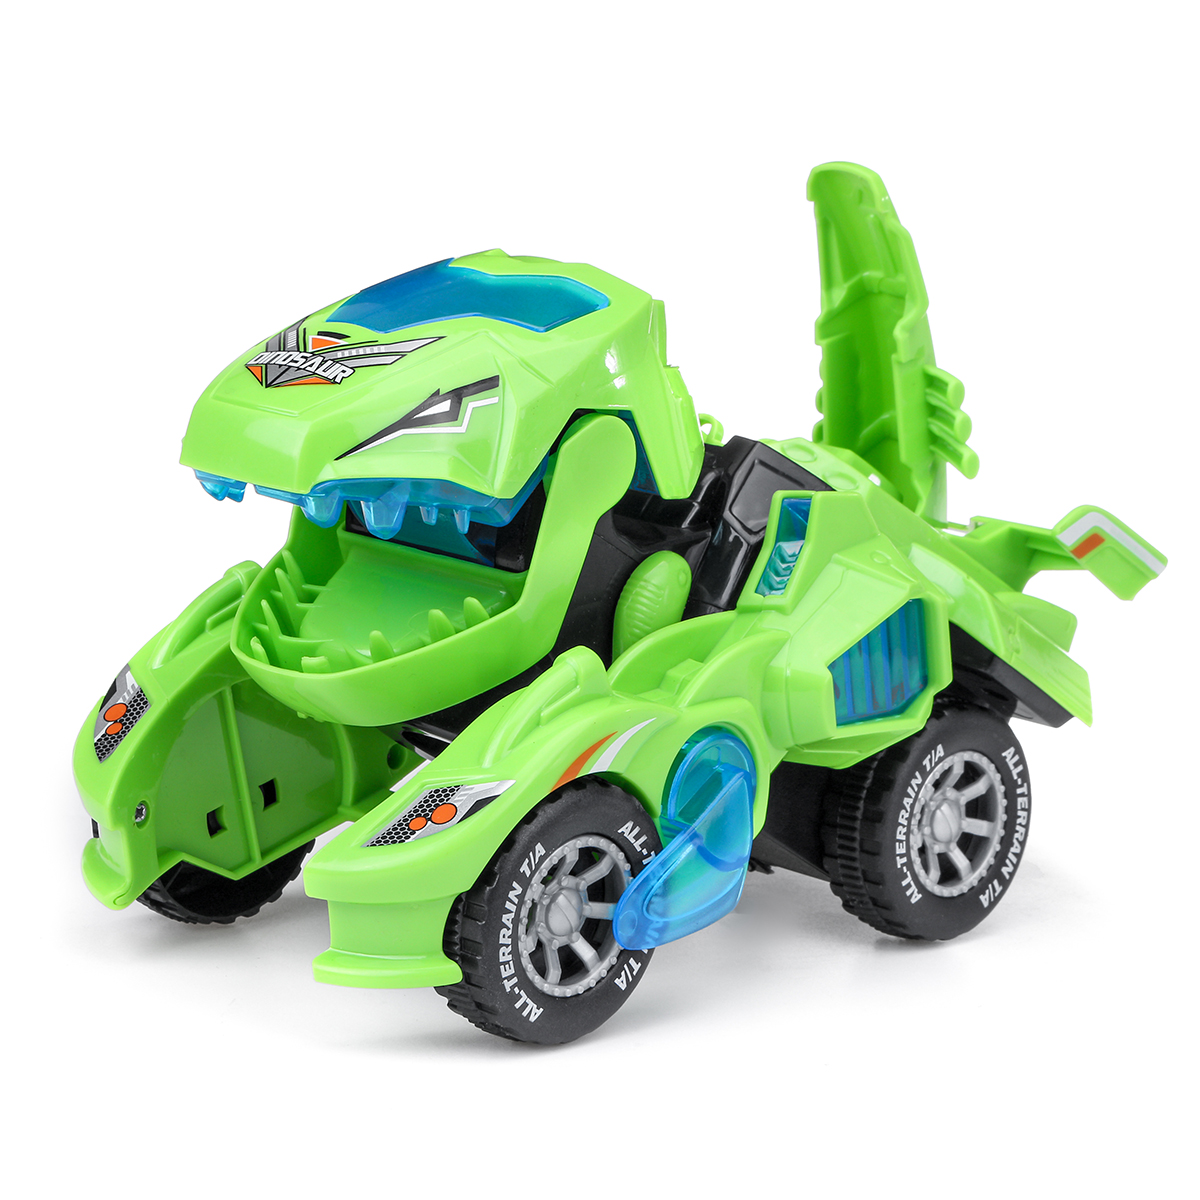 Creative-Dinosaur-Deformation-Toy-Car-Puzzle-Dinosaur-Electric-Toy-Car-Light-and-Music-Electric-Defo-1757309-9